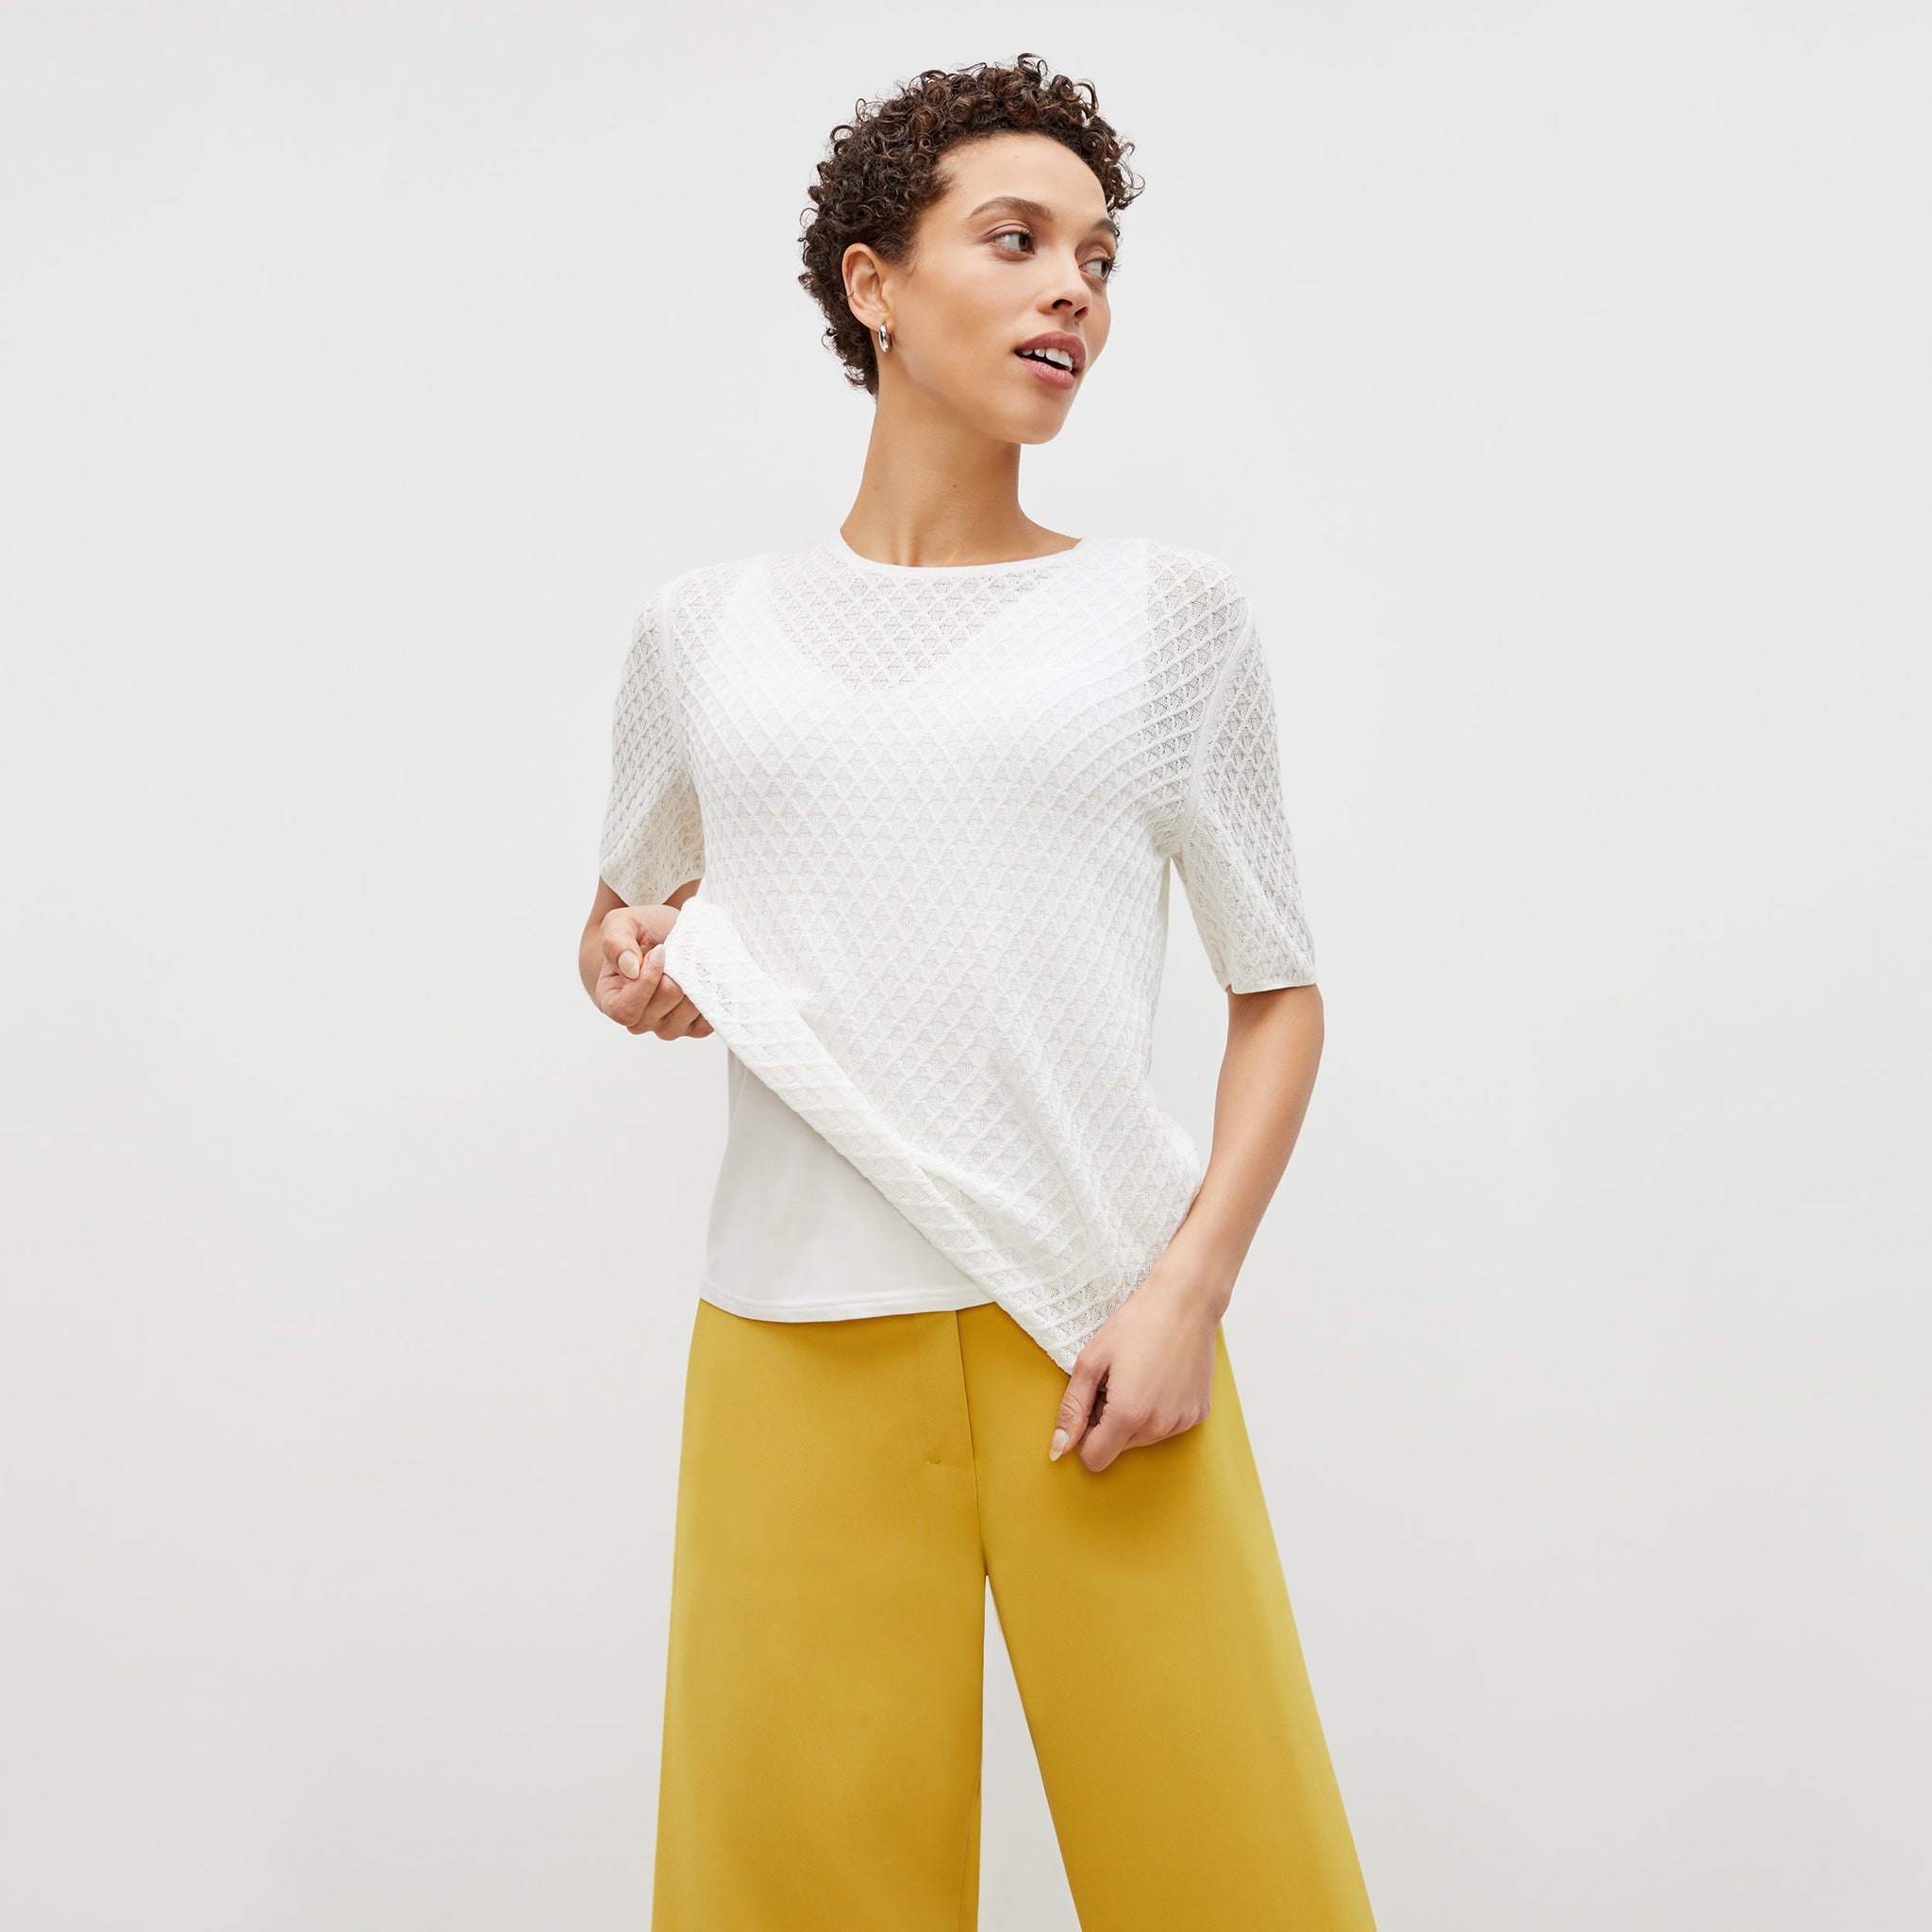 Front image of a woman standing wearing the natalie top in ivory